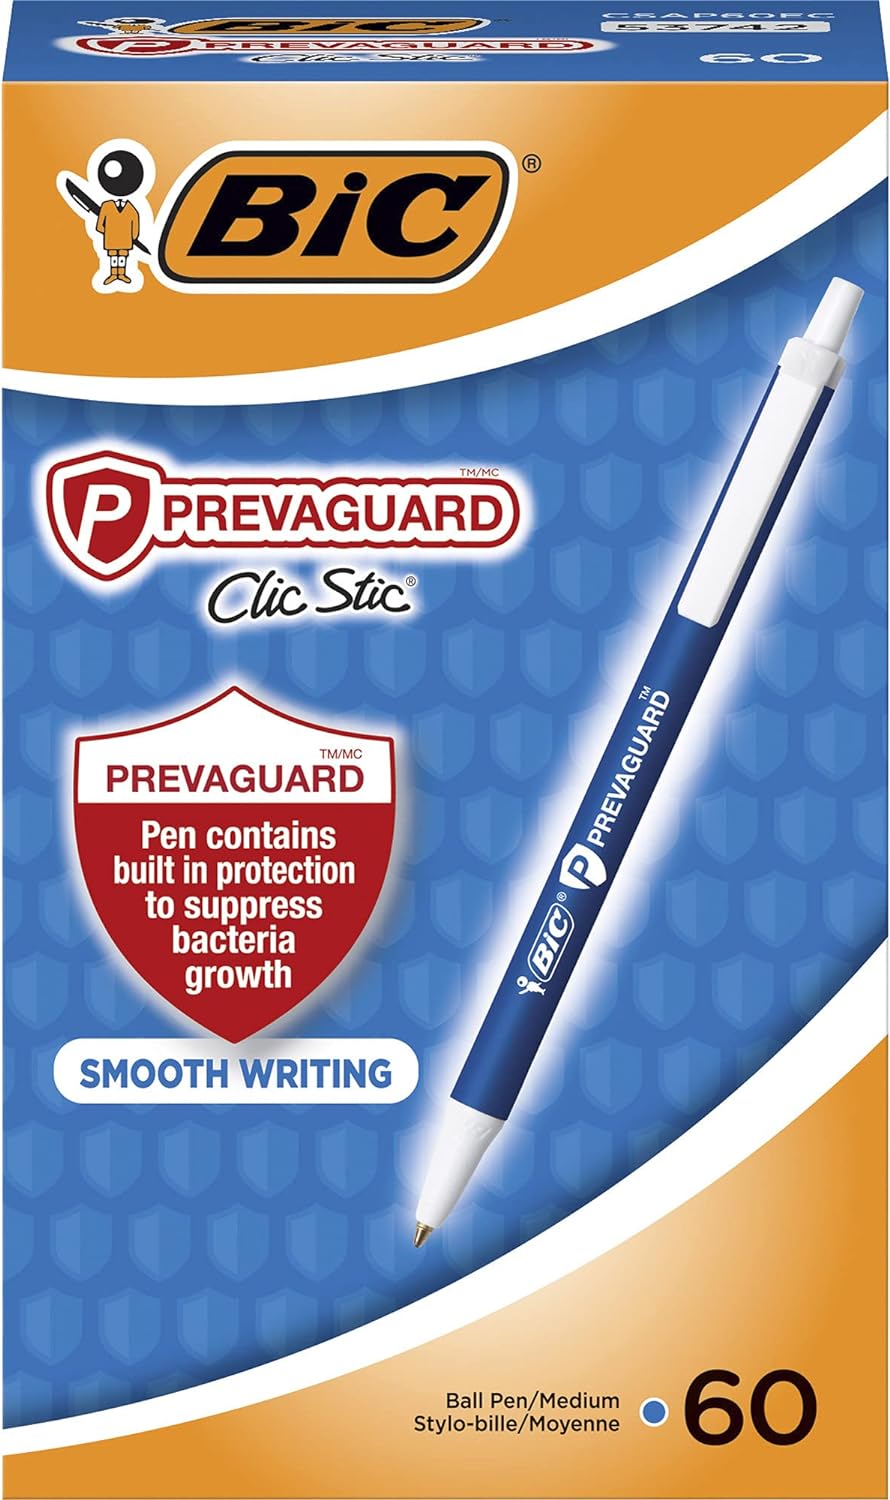 BIC PrevaGuard Clic Stic Ballpoint Pen Contains Built-in Protection On the Pen To Suppress Bacteria Growth, Blue, 60-Count